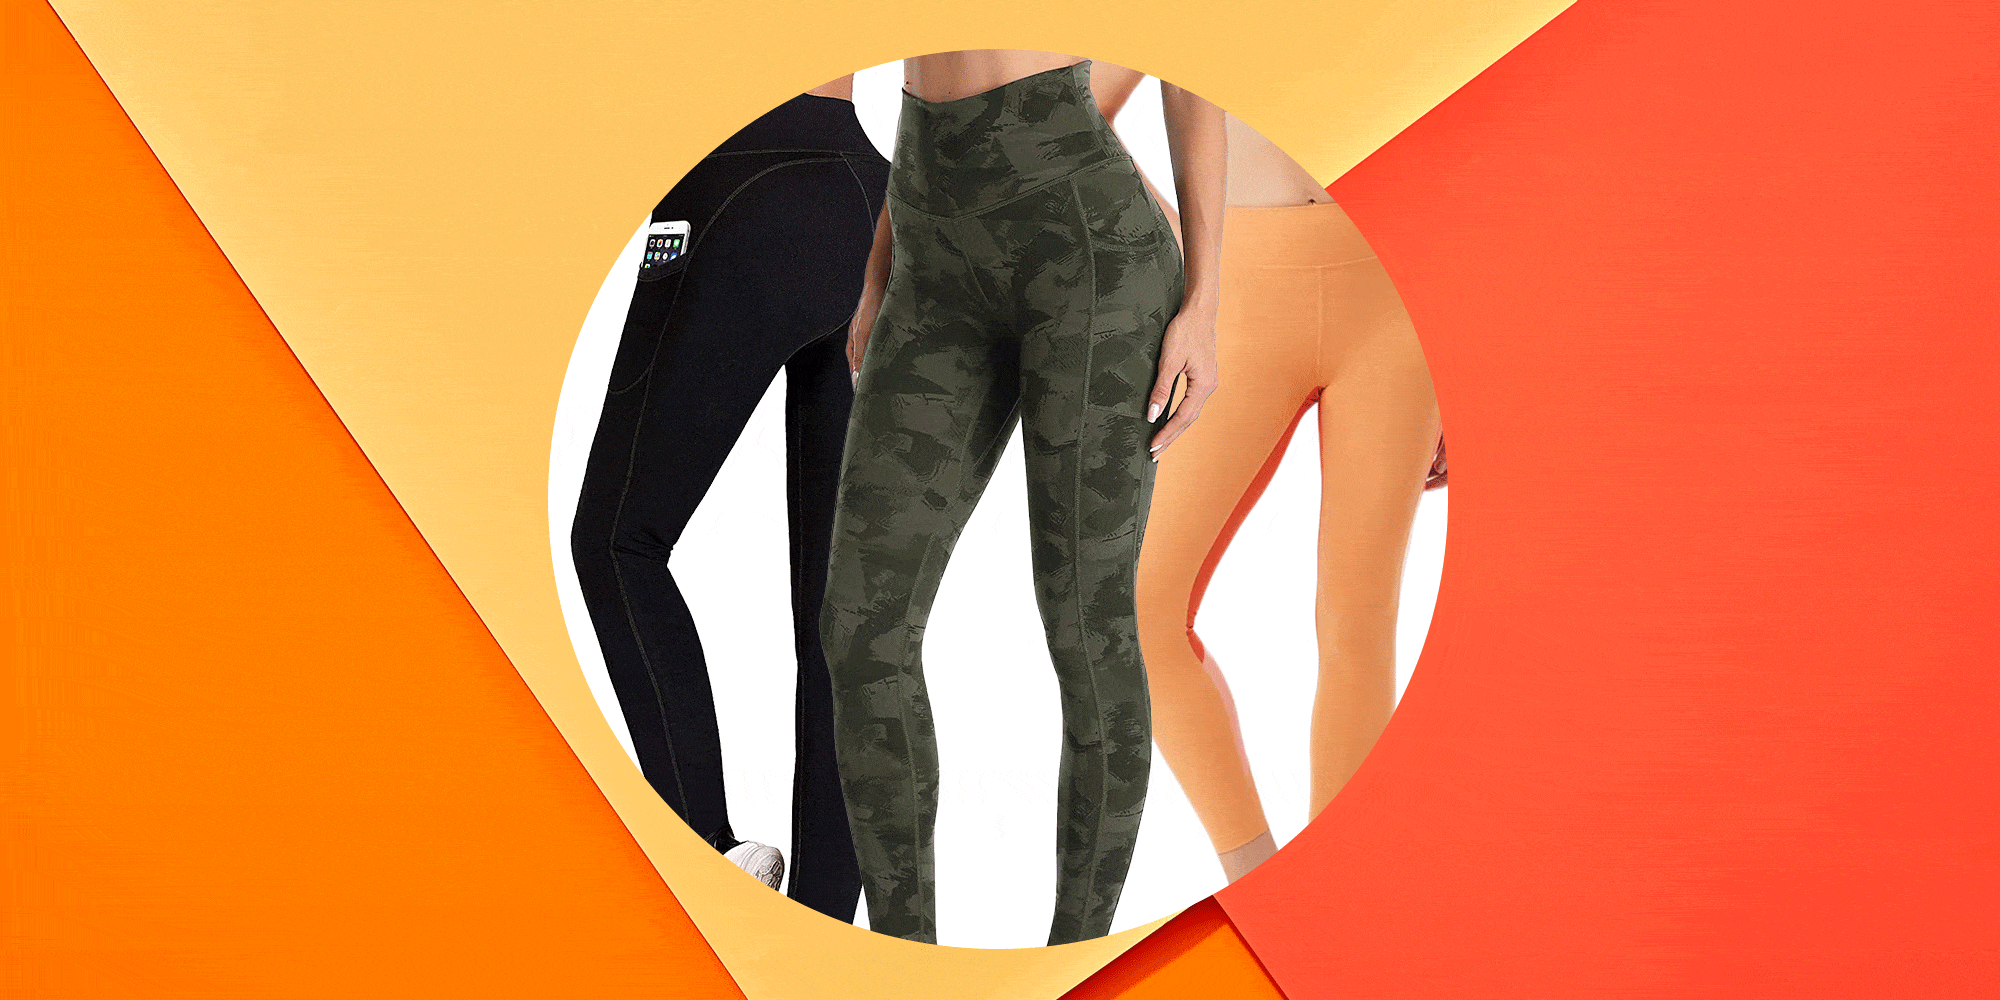 Women's Brushed Sculpt High-rise Pocketed Leggings - All In Motion™ : Target